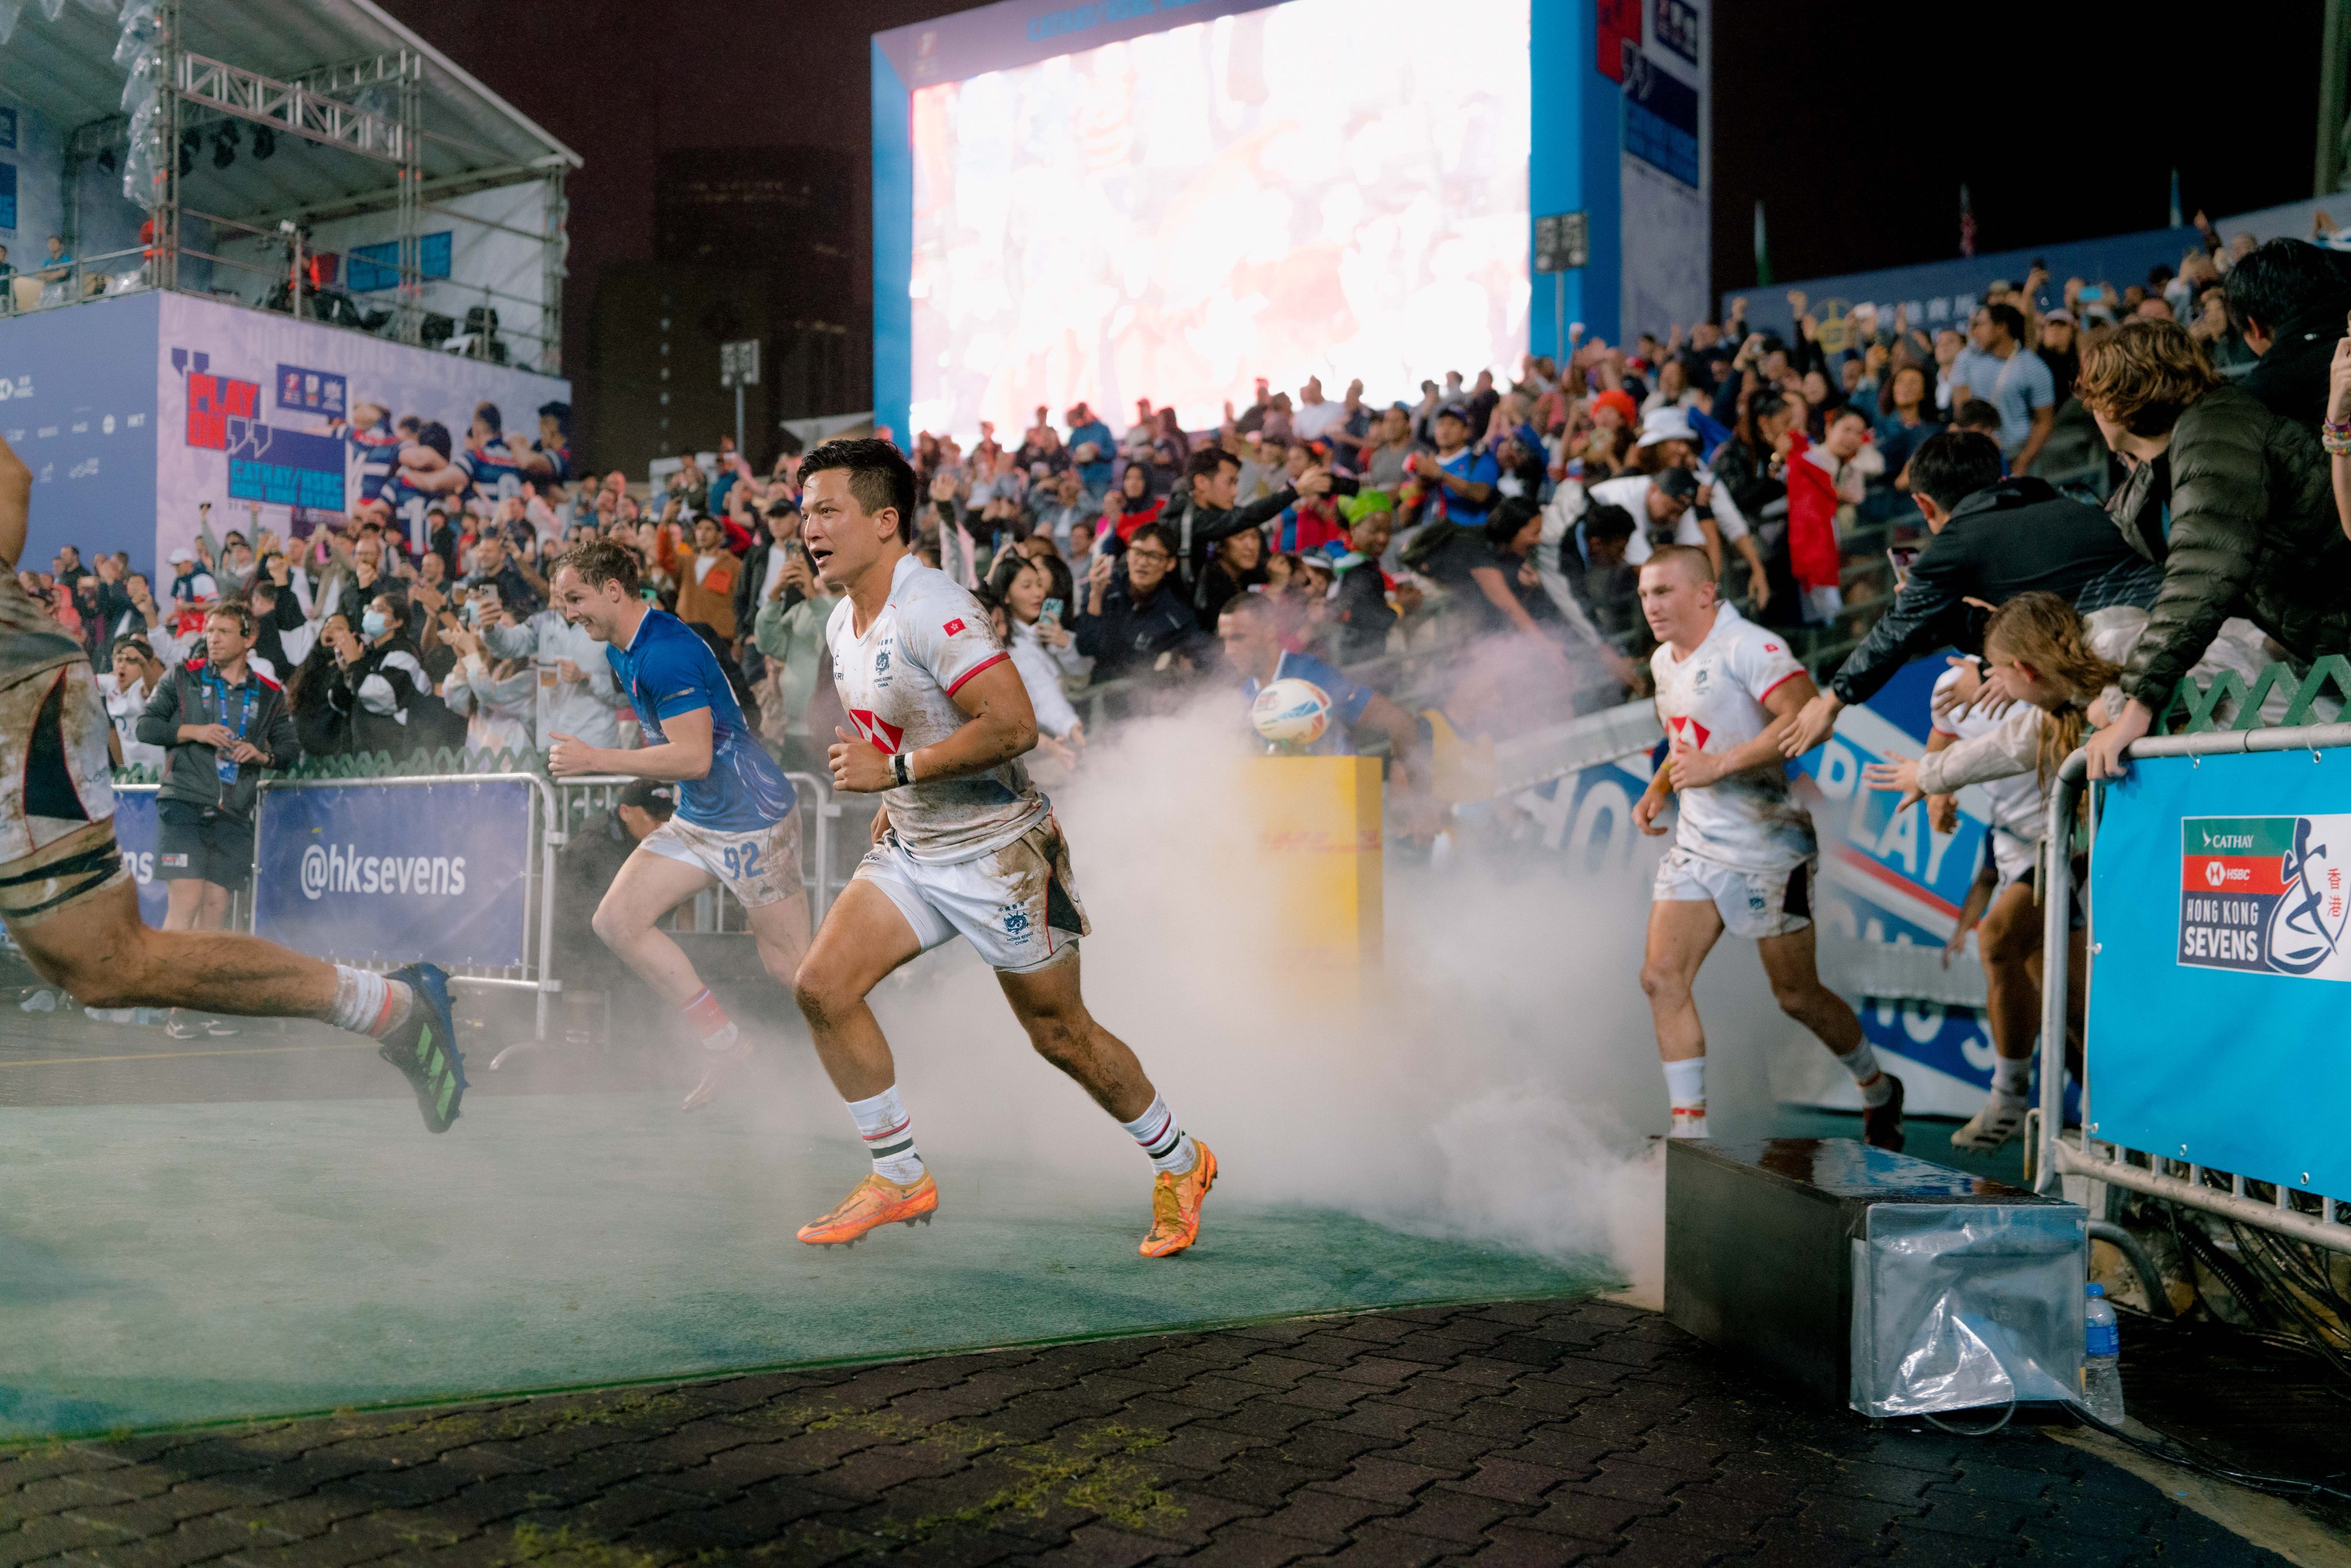 The Hong Kong men’s team runs out during a game at the Sevens in April, 2023. Photo: World Rugby